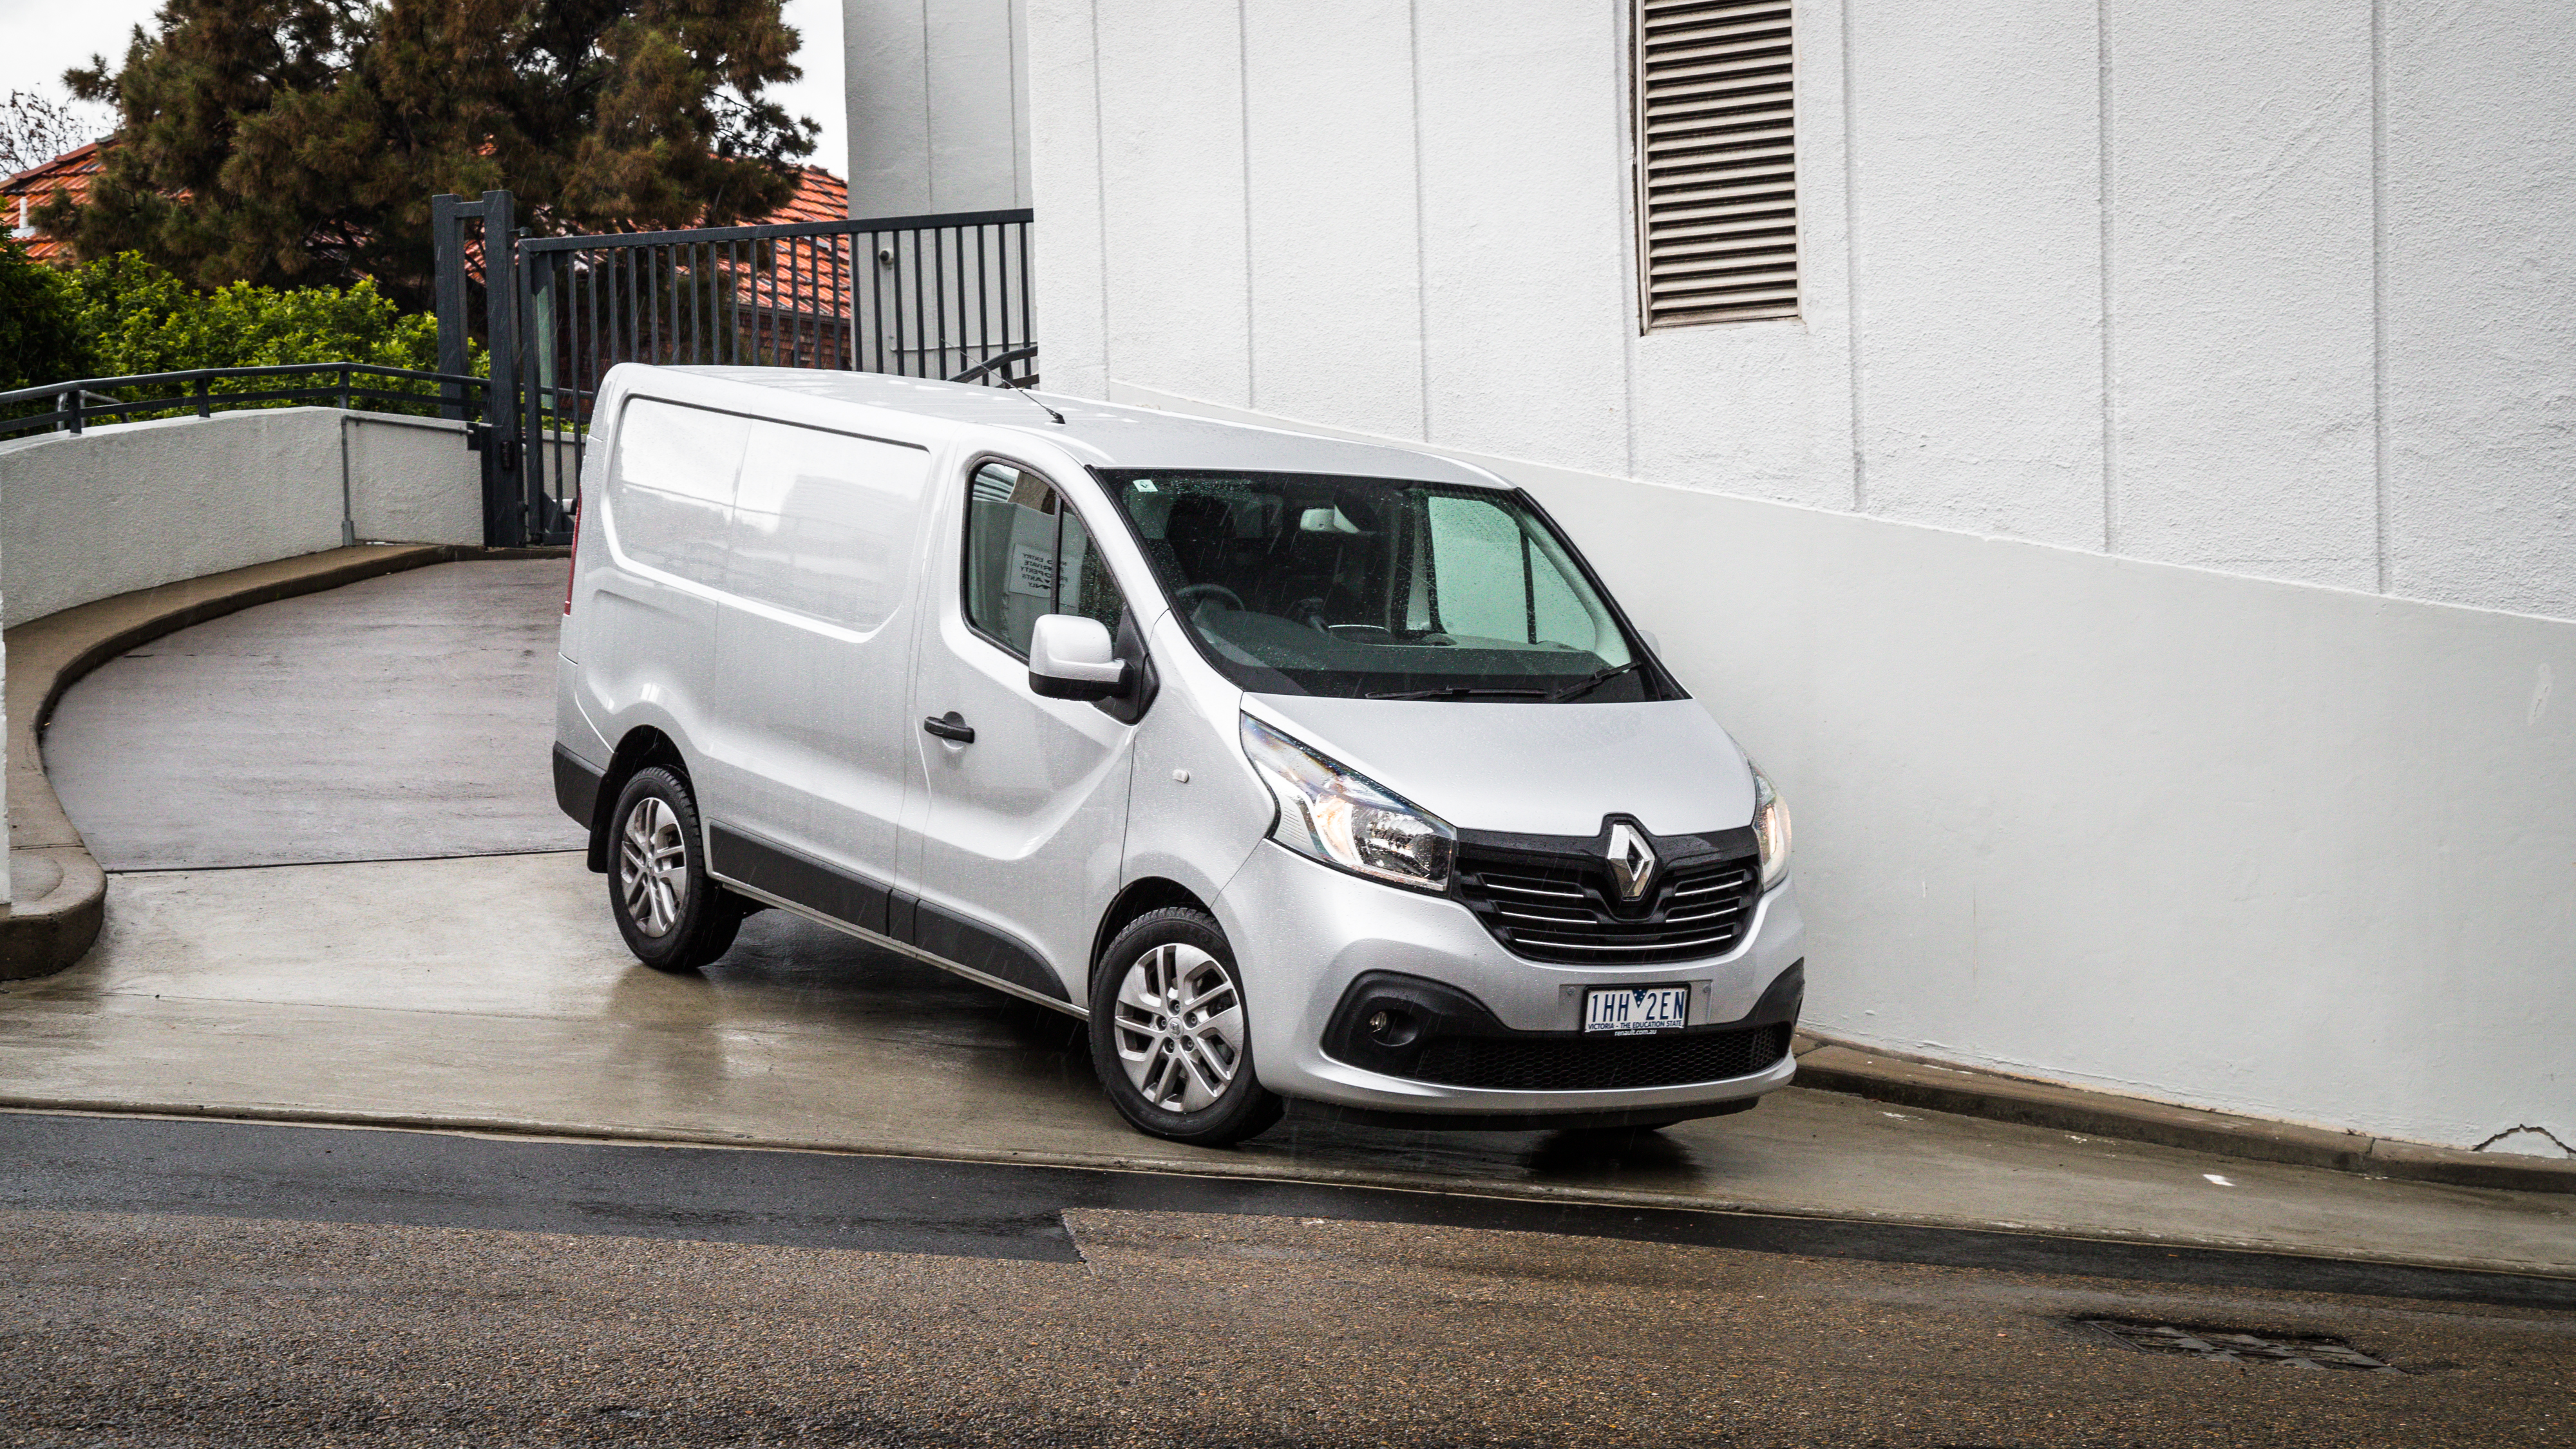 2018 Renault Trafic recalled | CarAdvice